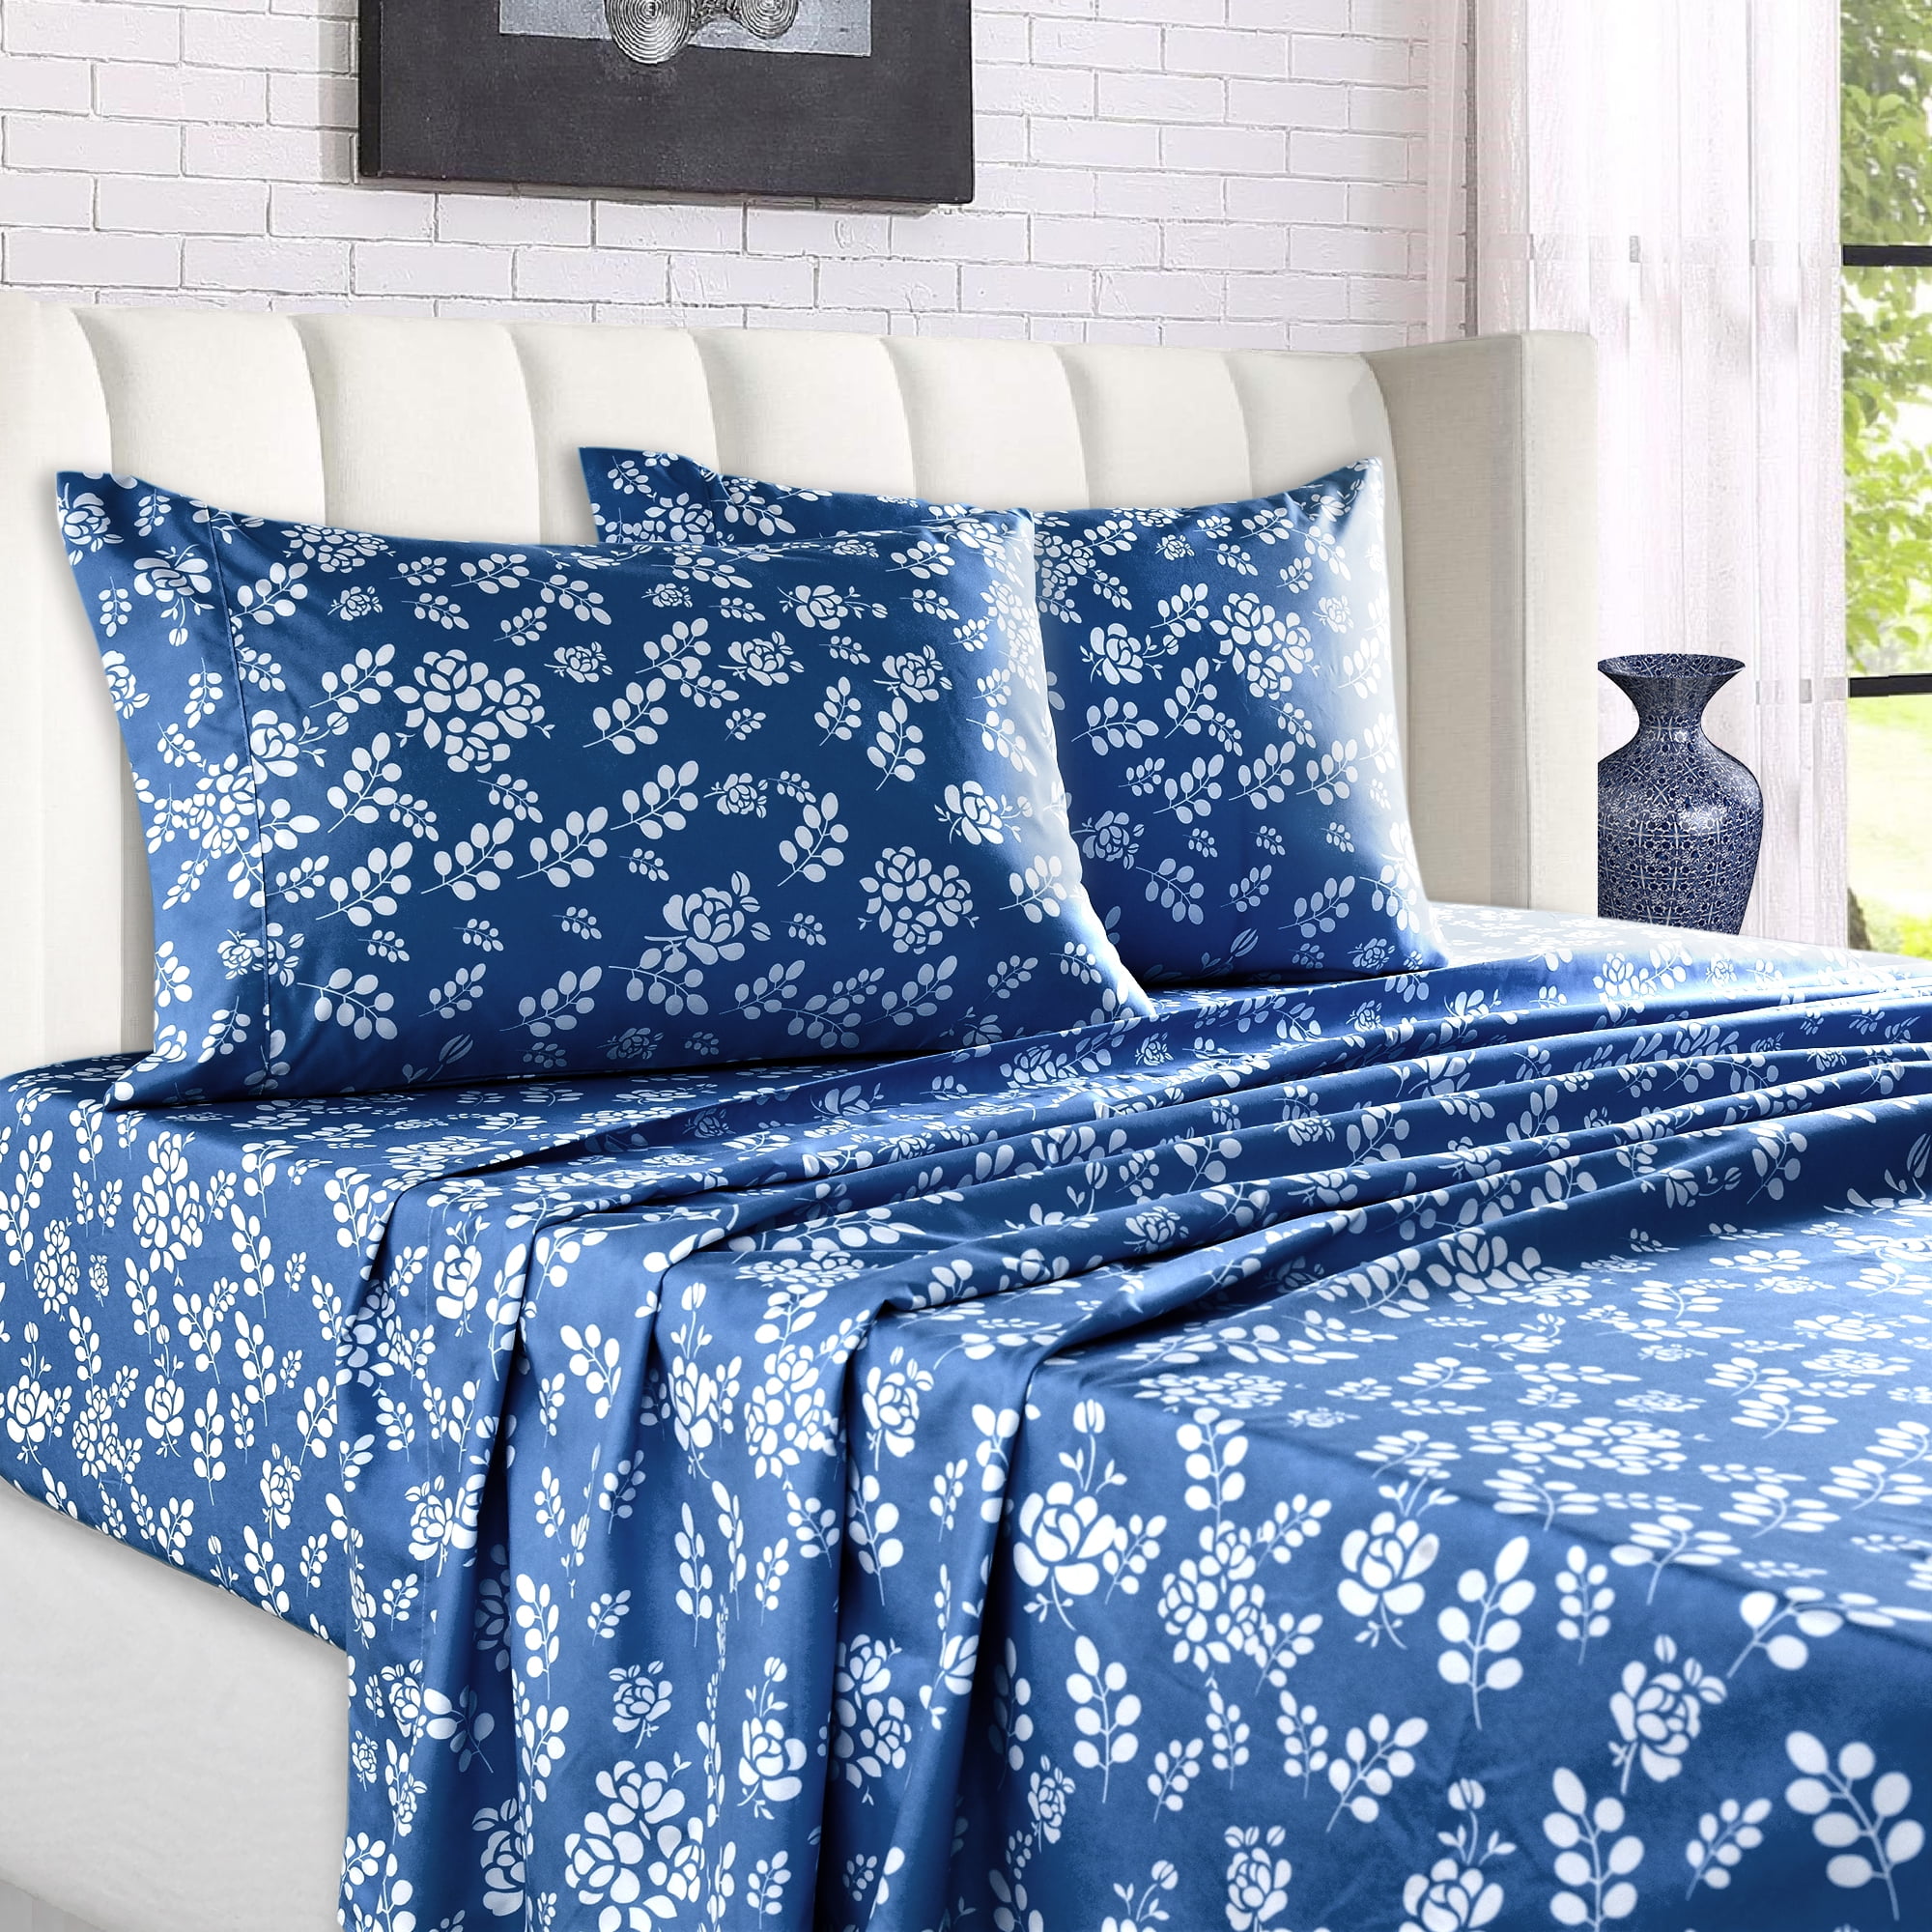 Lux Decor Collection Bed Sheets, 4 Piece Microfiber Deep Pocket Queen  Sheets Set - Floral, Navy Blue